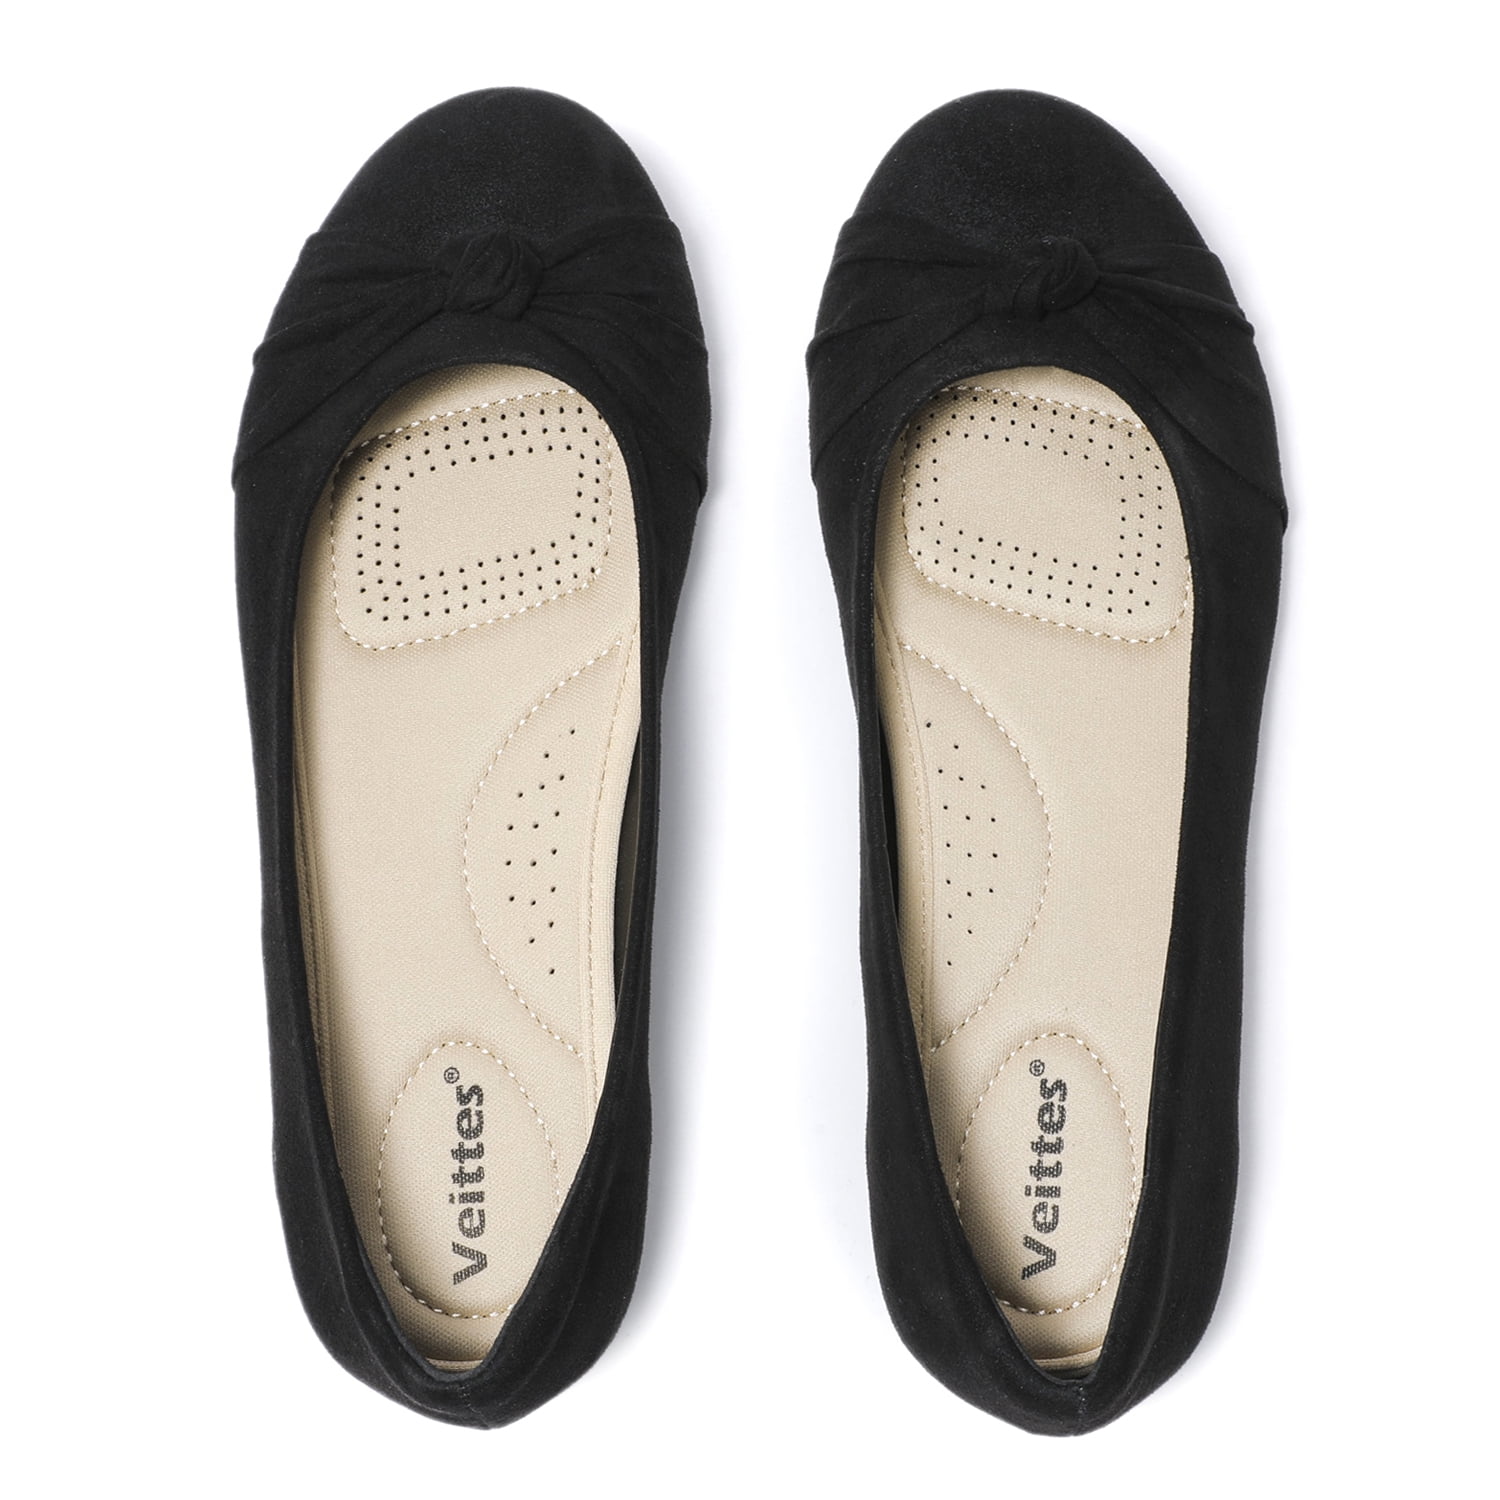 1910003-3,WR/MF,8.5 Wide Ataiwee Women's Wide Width Flat Shoes Ballet Round Toe Simple Black Slip on Shoes. 